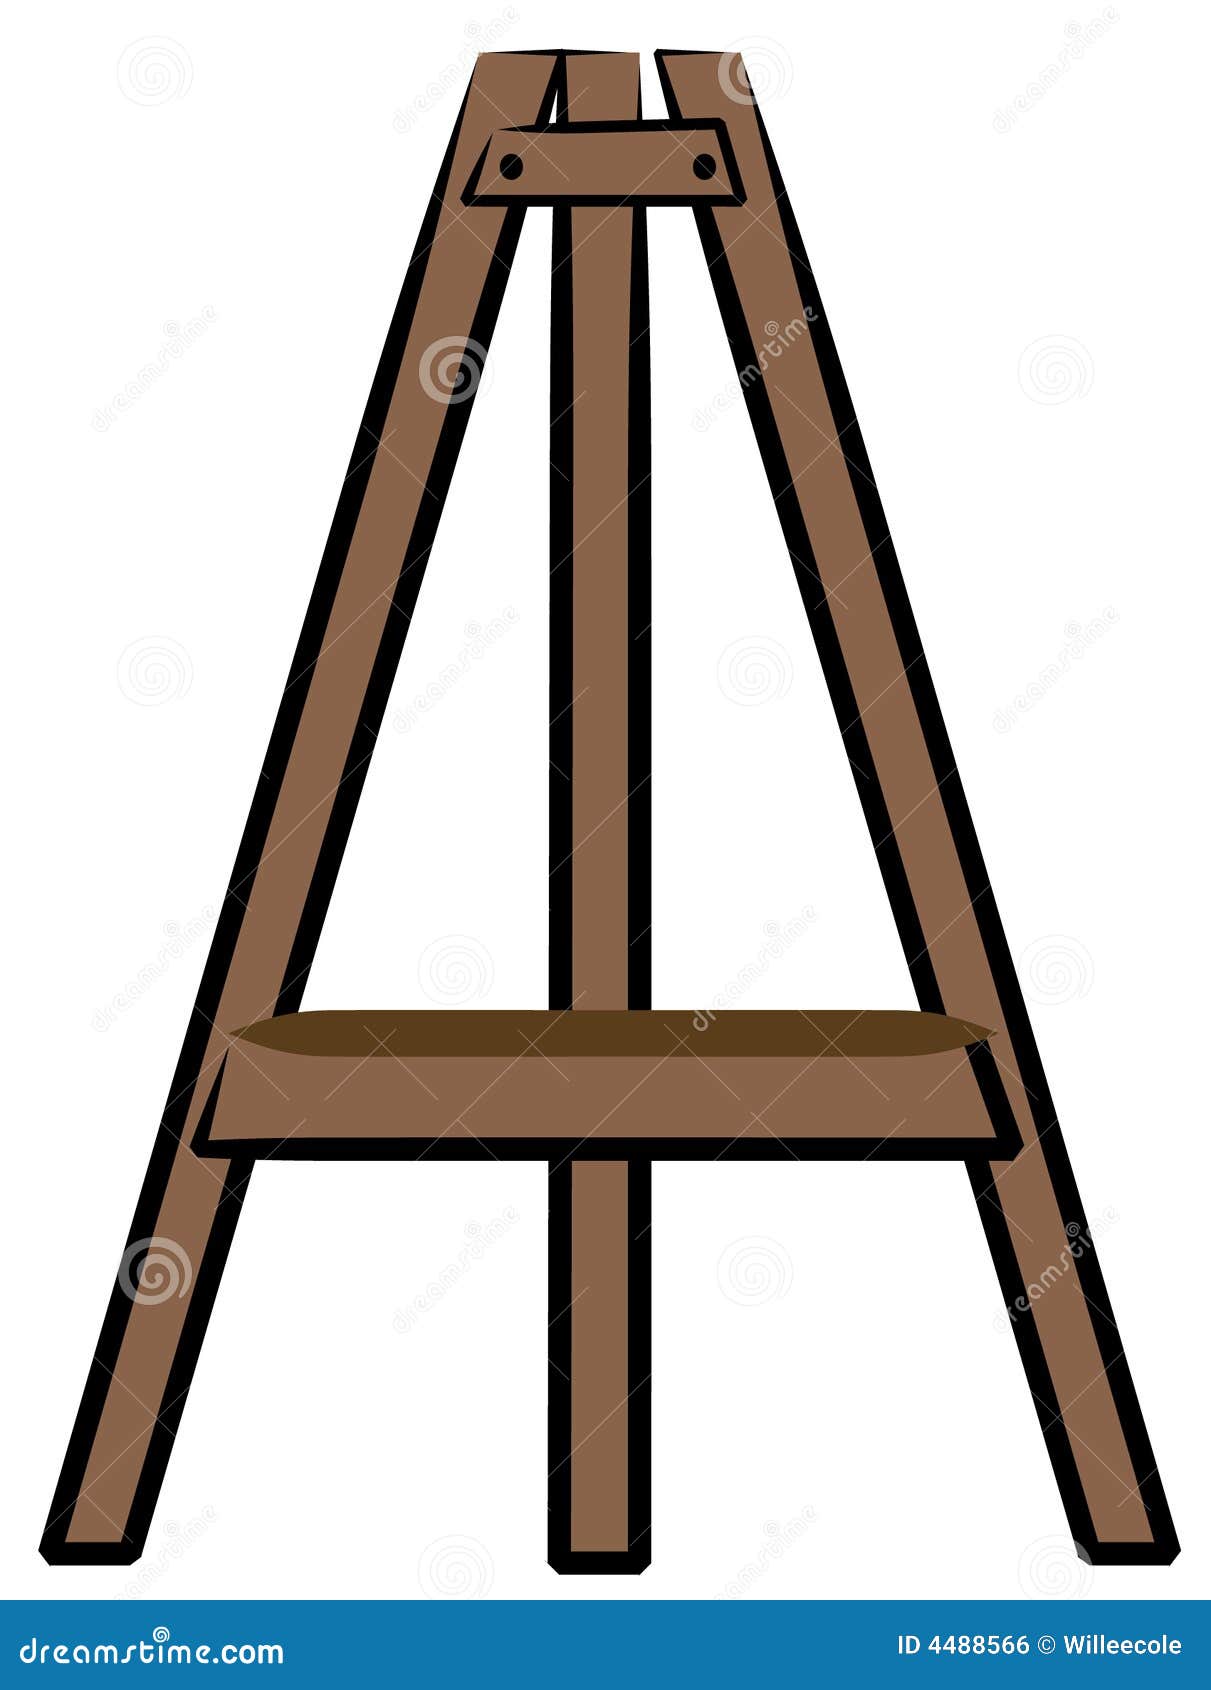 Easel Stand Royalty Free Stock Image - Image: 4488566